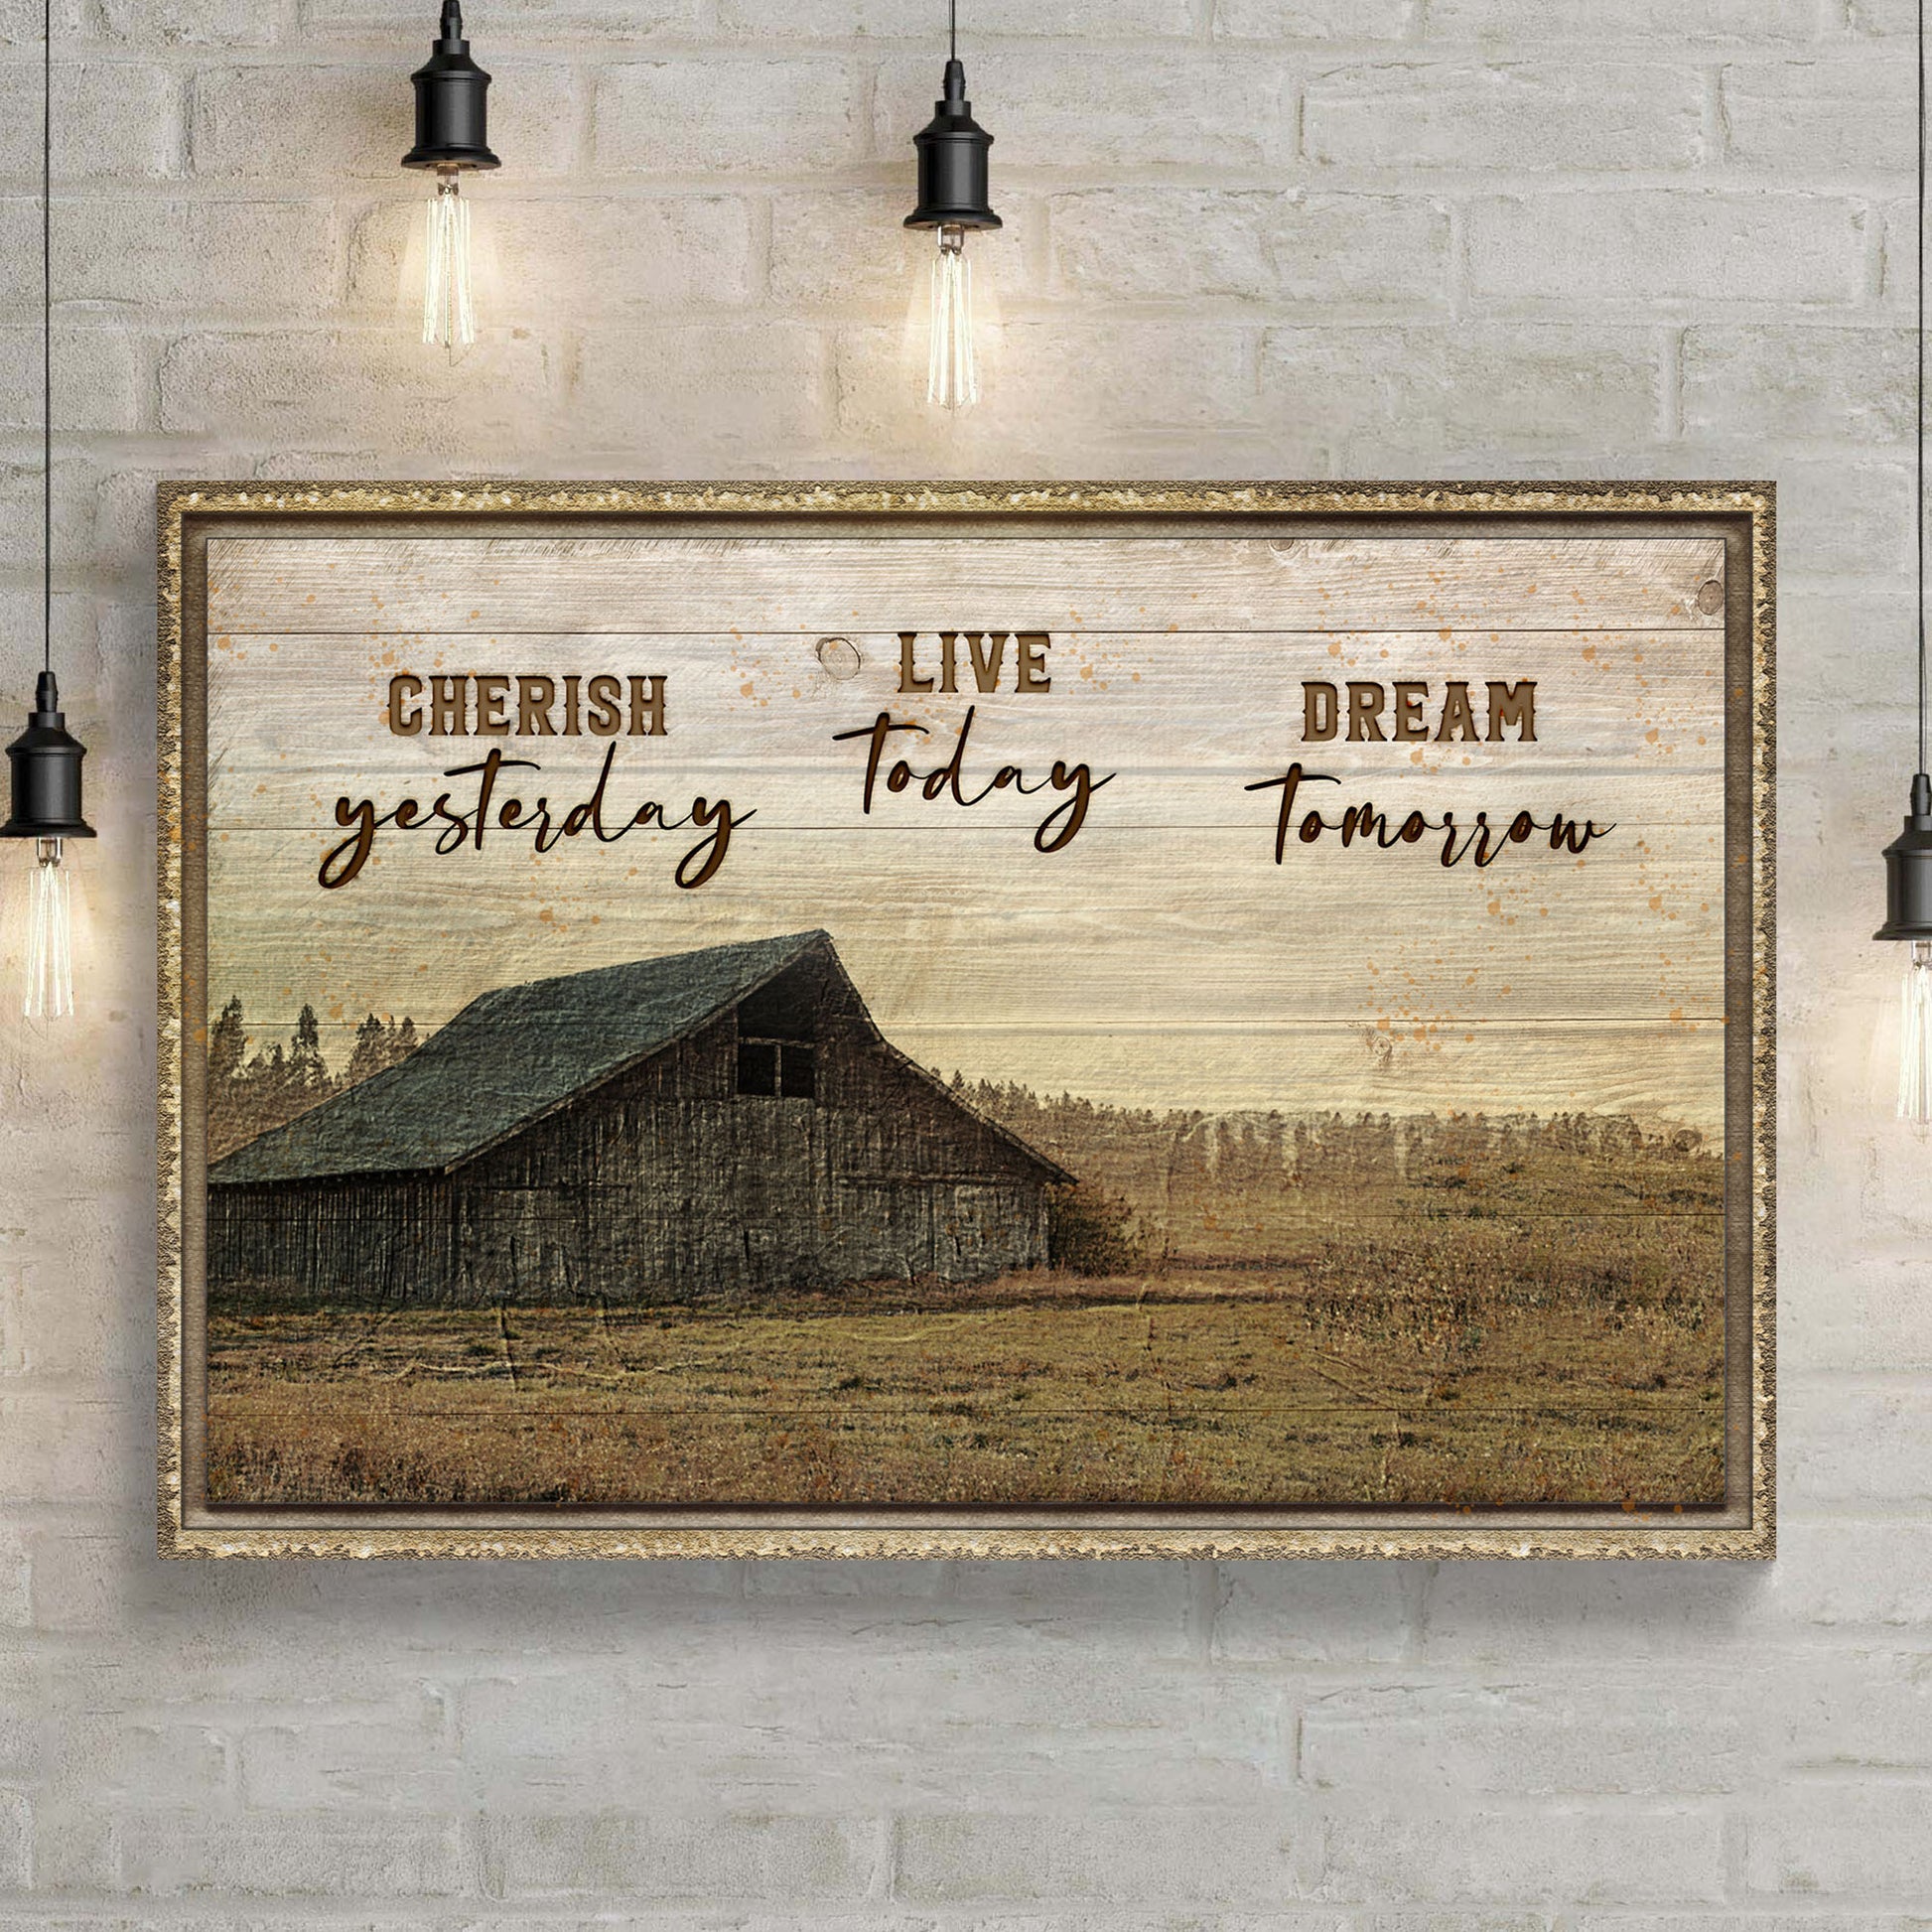 Cherish Yesterday, Live Today, Dream Tomorrow Sign - Image by Tailored Canvases